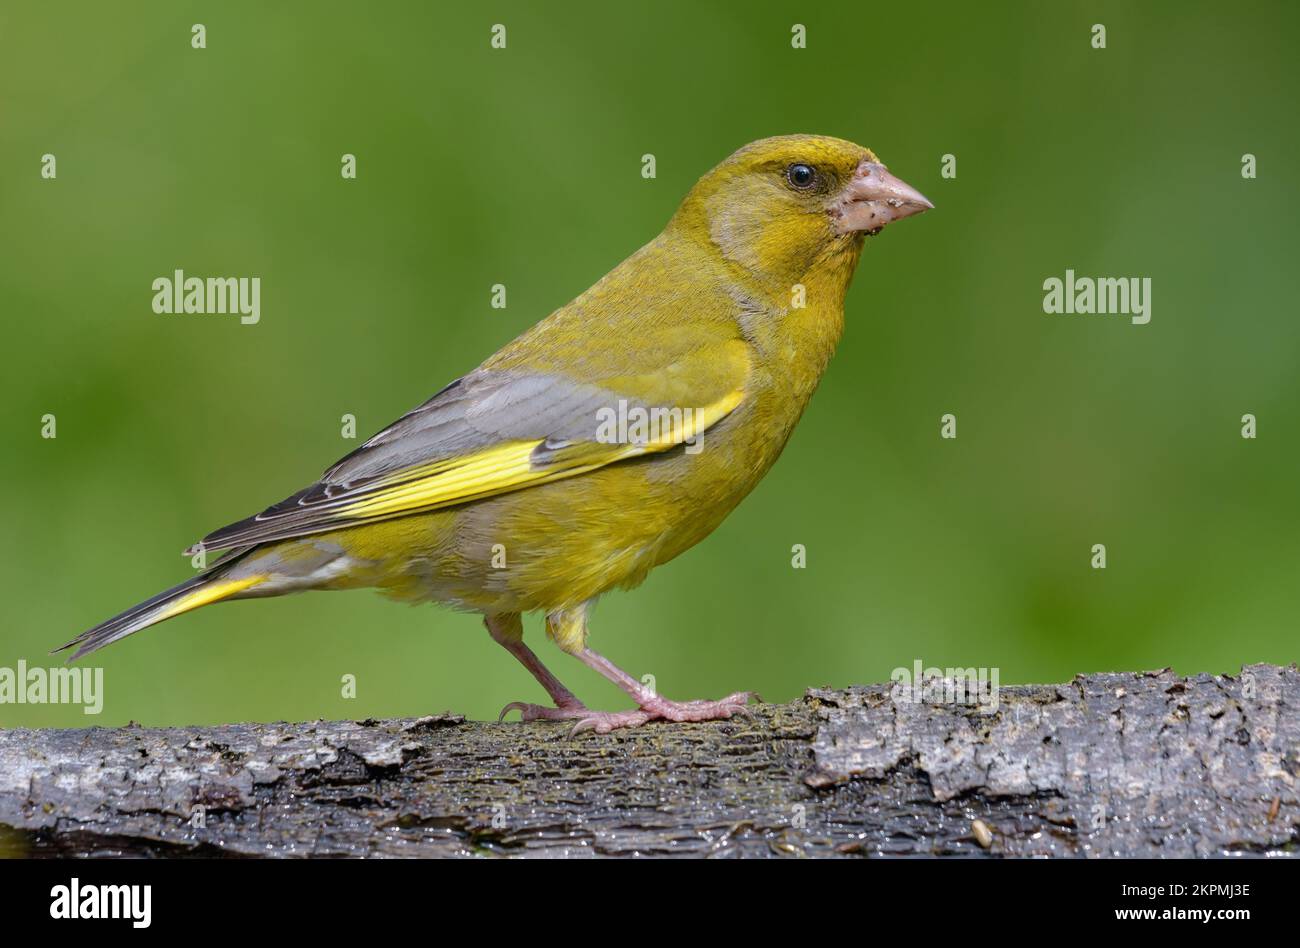 Male European Greenfinch (Chloris chloris) sitting on dry old looking branch with neat green background Stock Photo